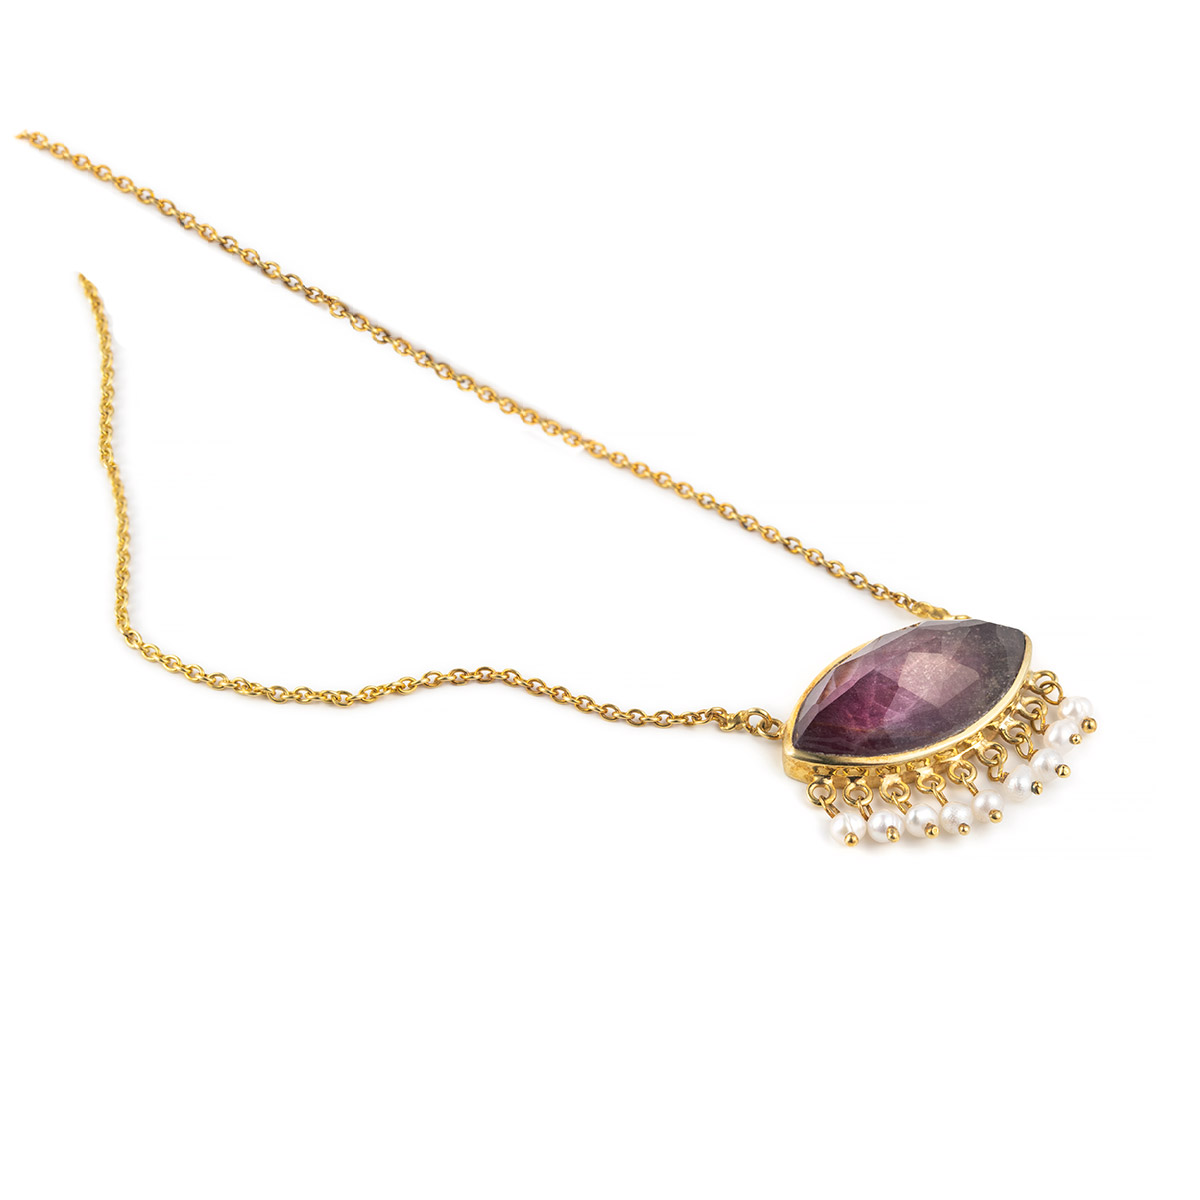 Doublet Ruby Eye Necklace with Pearls - Sterling Silver and Gold Plated